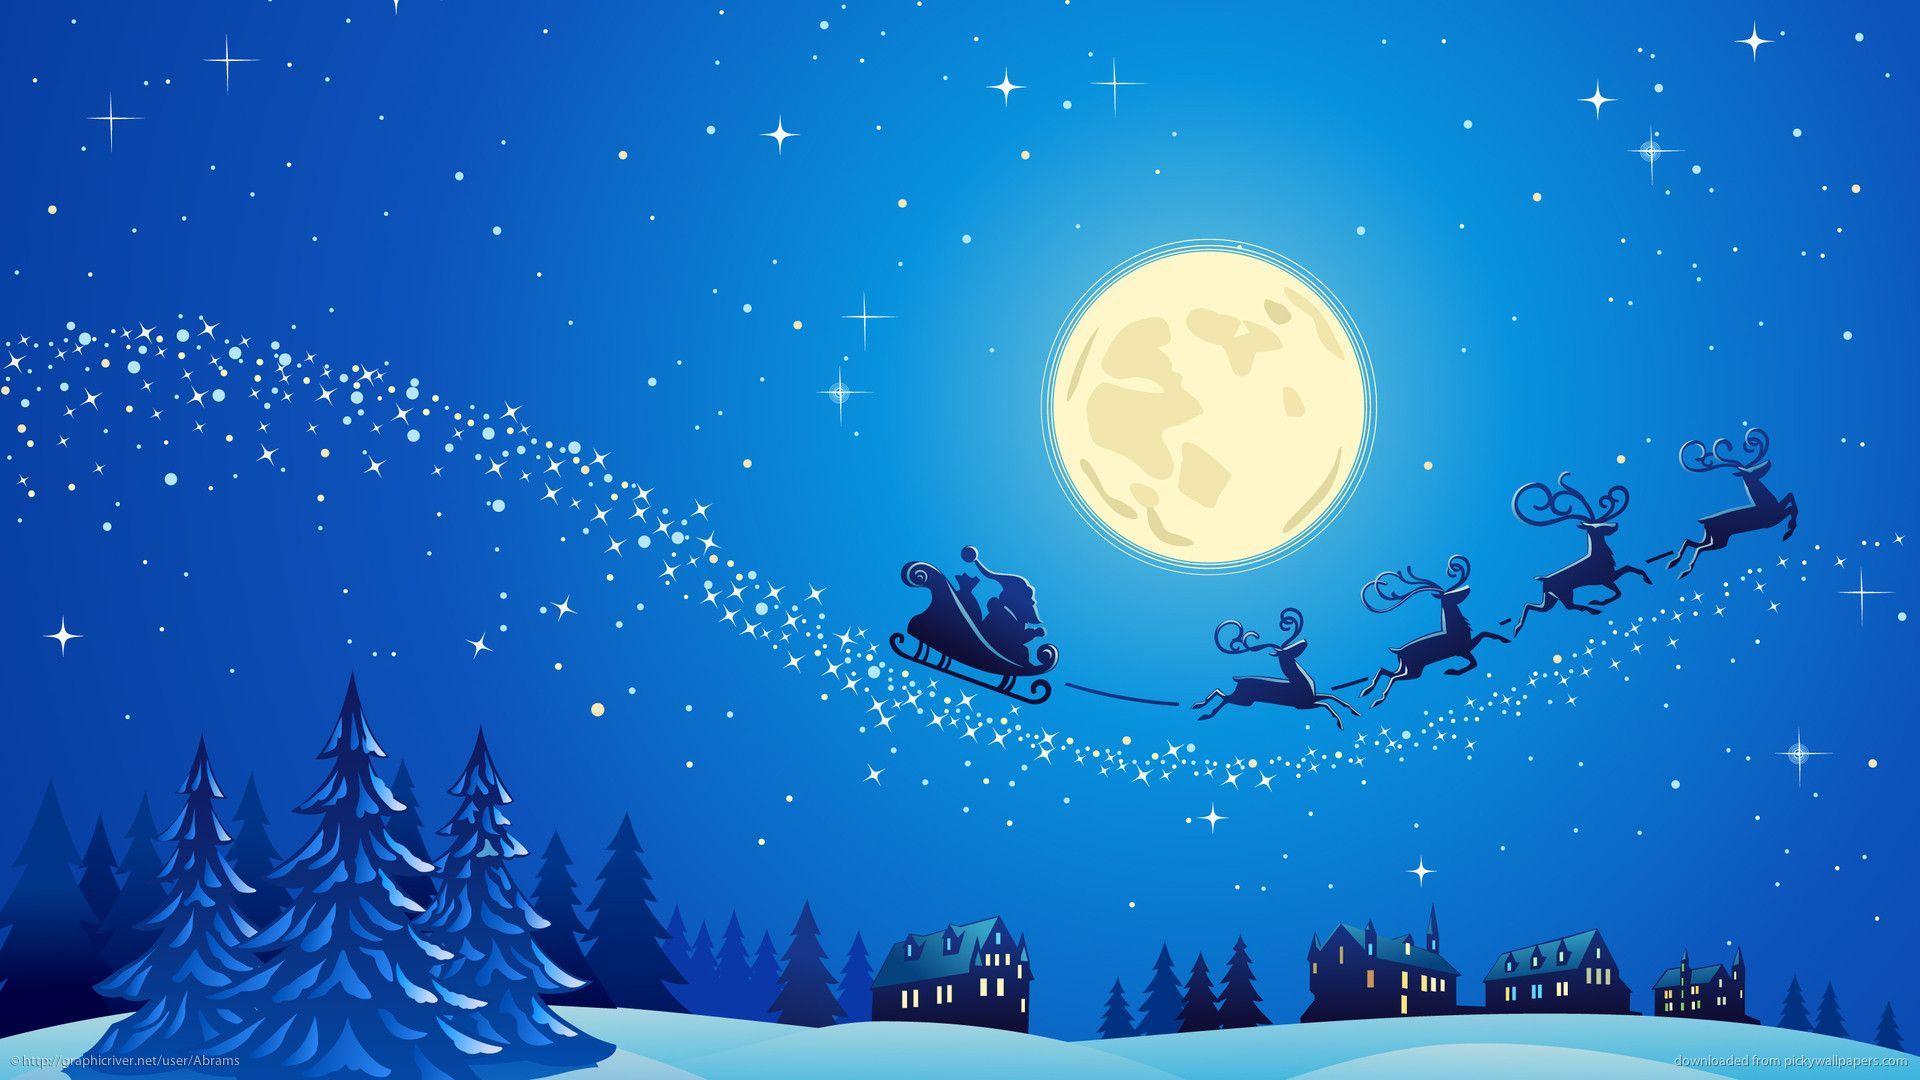 Download 1920x1080 Santa Into The Winter Christmas Night 2 Wallpapers